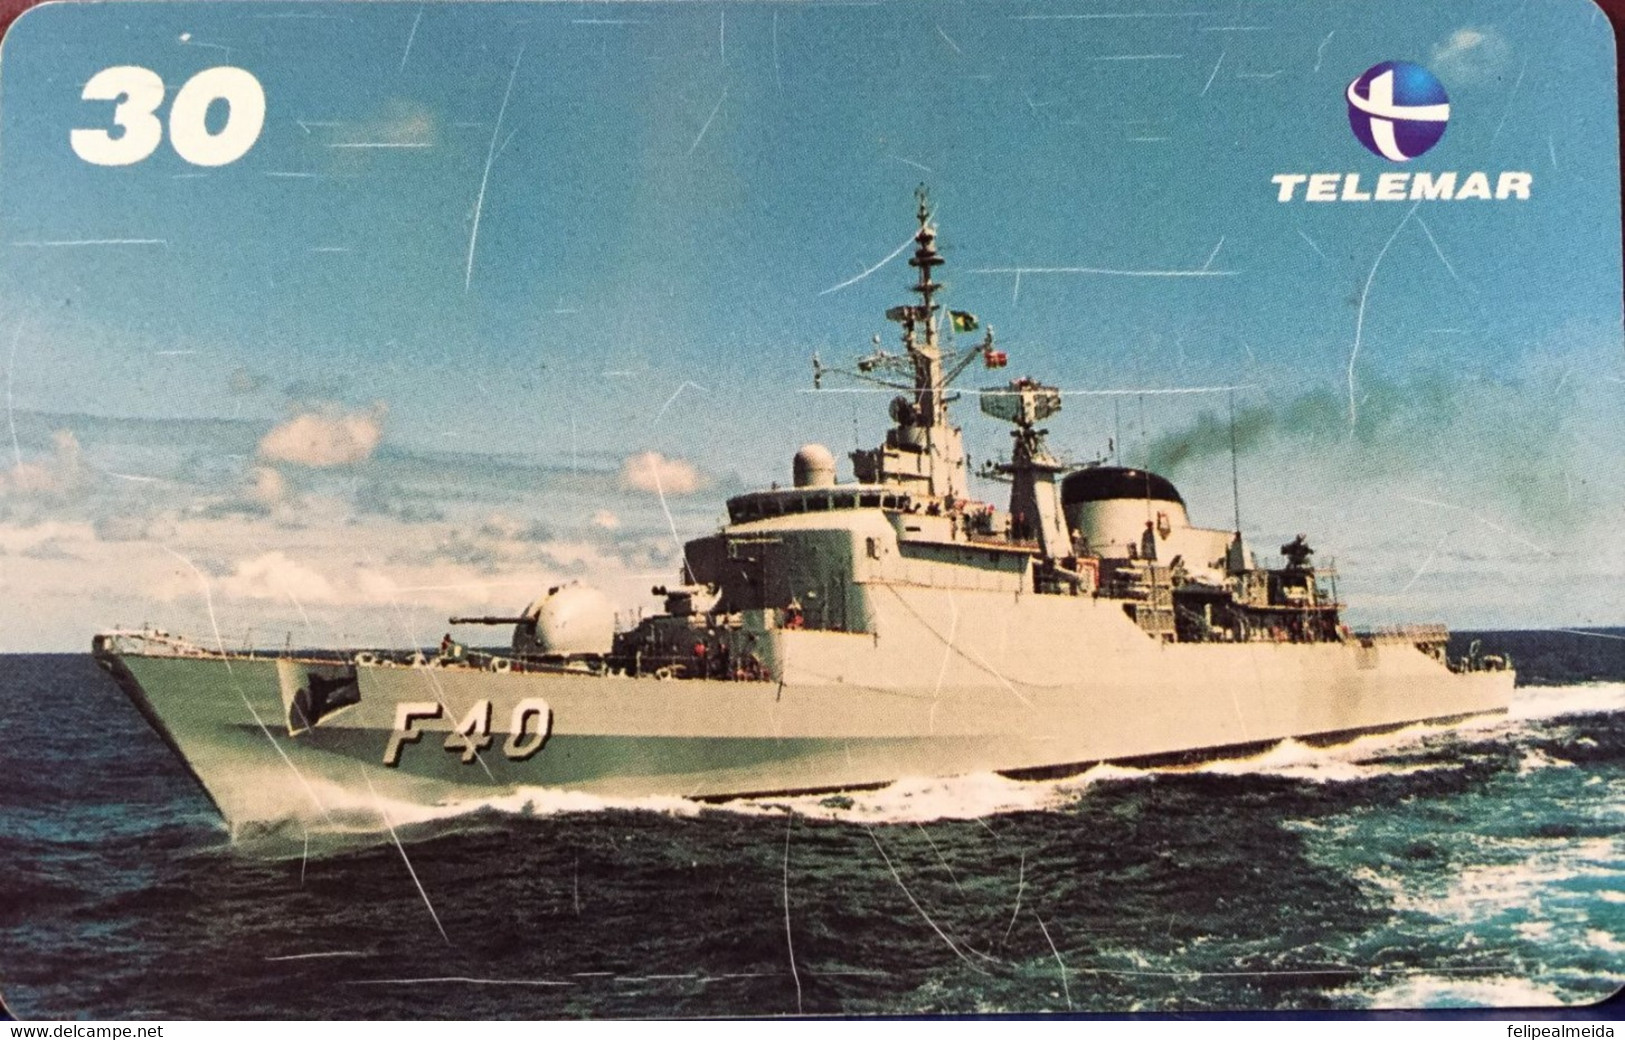 Phone Card Manufactured By Telemar In 2000 - Brazilian Navy - Commemoration Of The Fleet's 178th Anniversary - Photo Fra - Armada